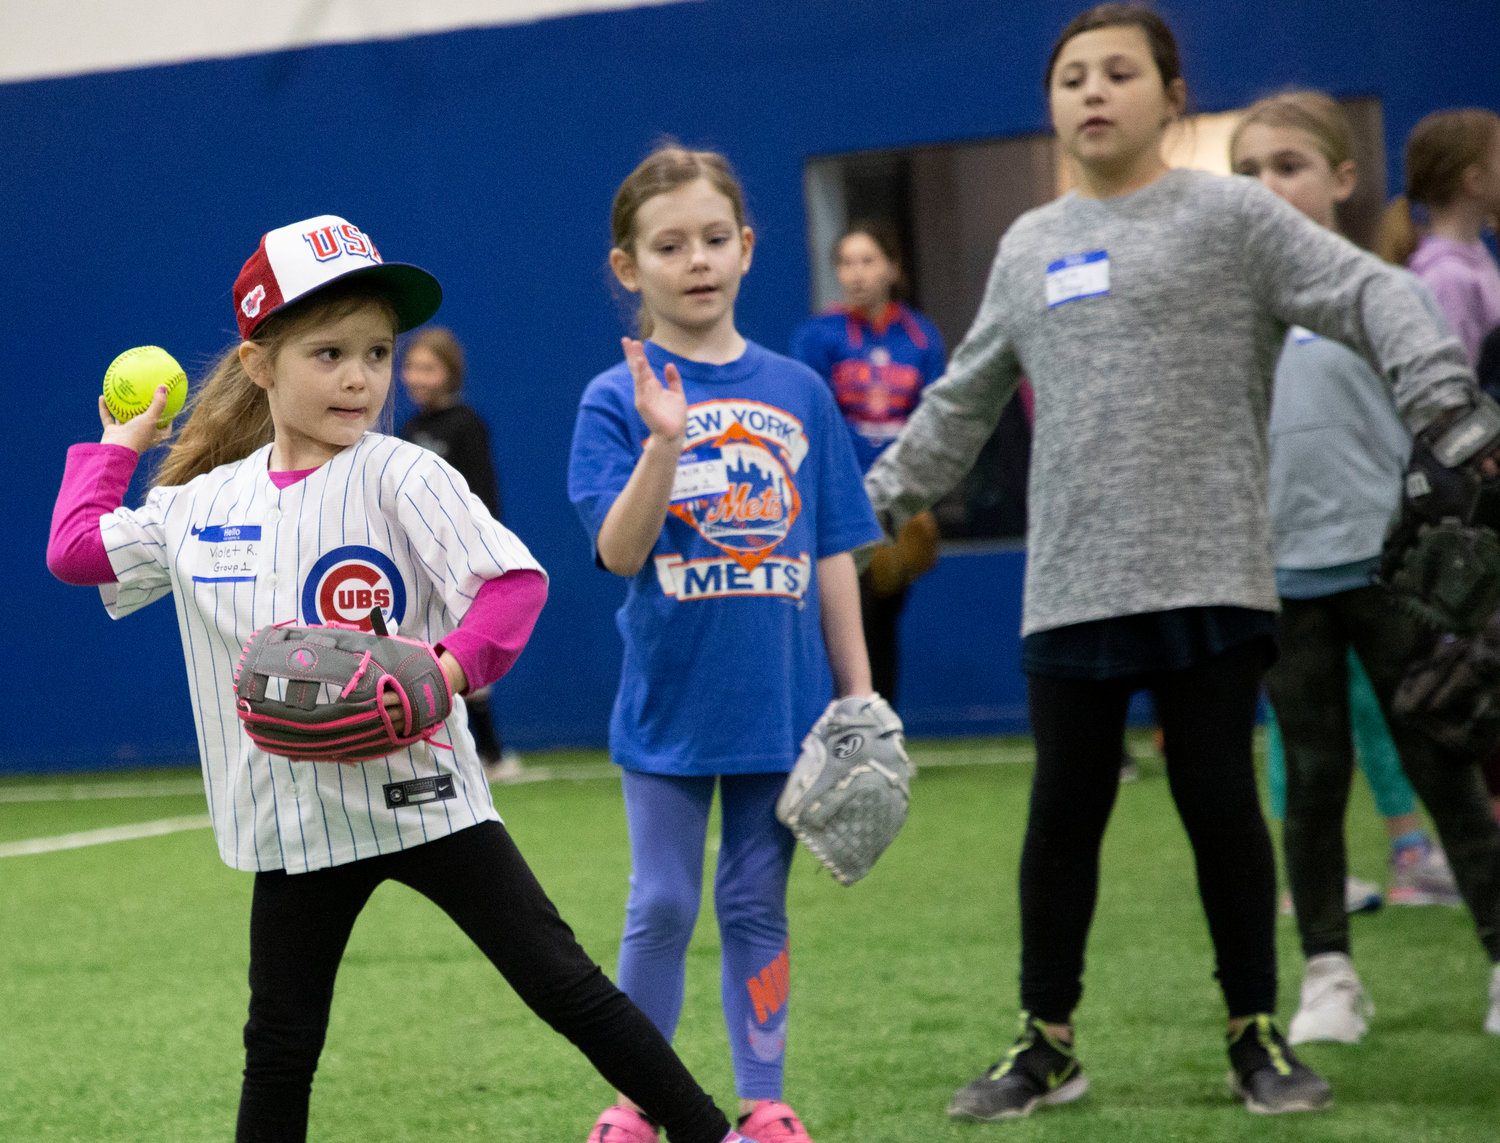 Violet Robertson gets ready to throw the ball during a special skills clinic held by Barrington Little League and NY Mets pitcher David Robertson.